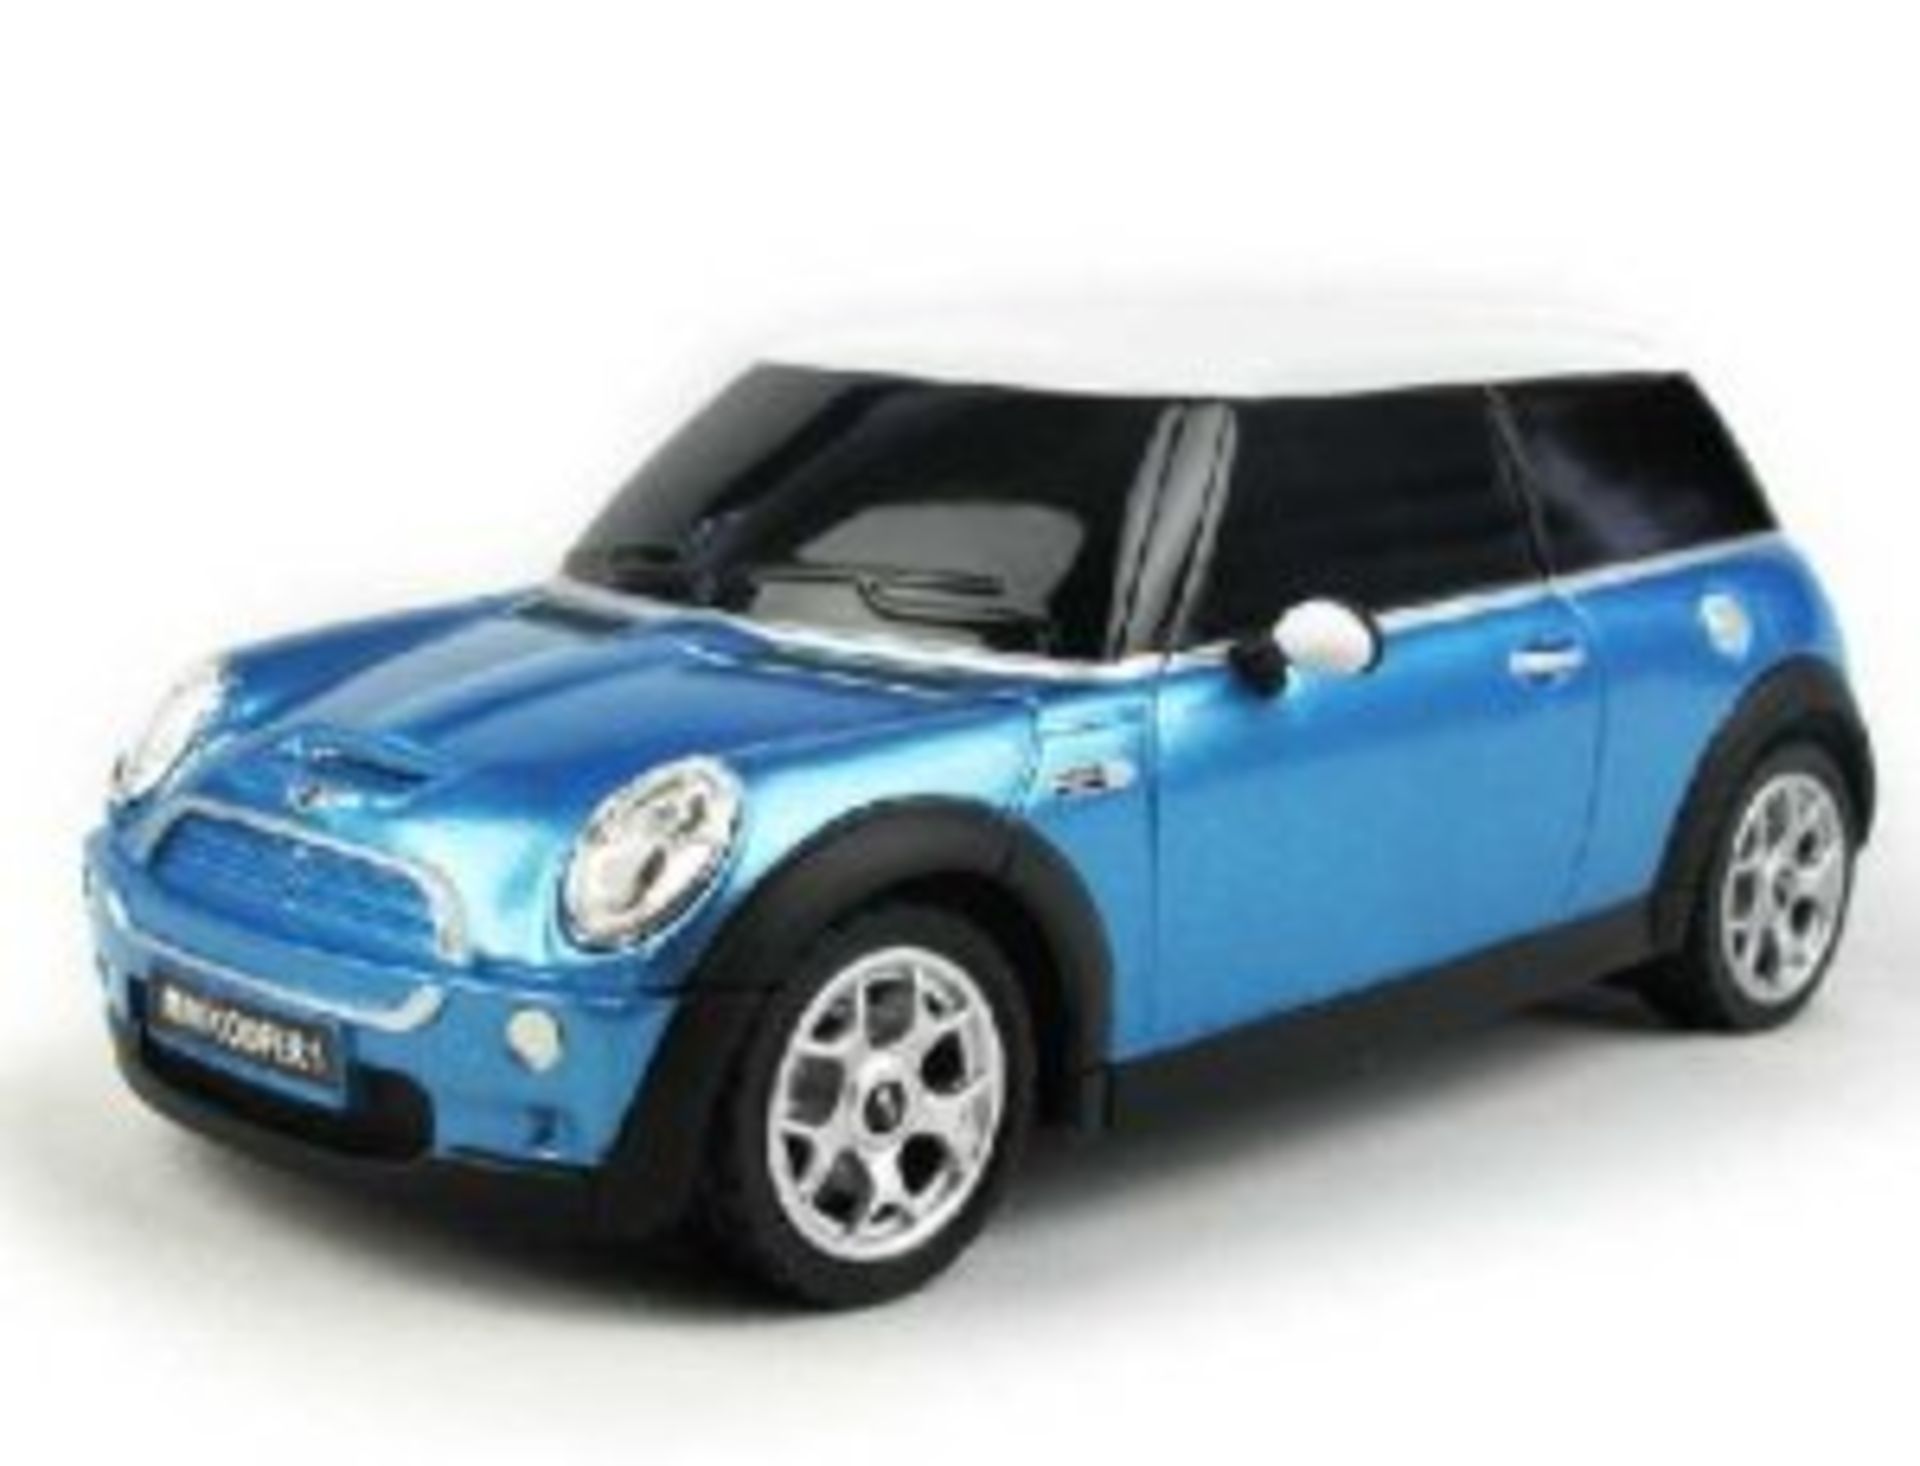 V Brand New 1/24 RC Mini Cooper S Full Function Remote Control Car - Official Merchandise In - Image 2 of 2